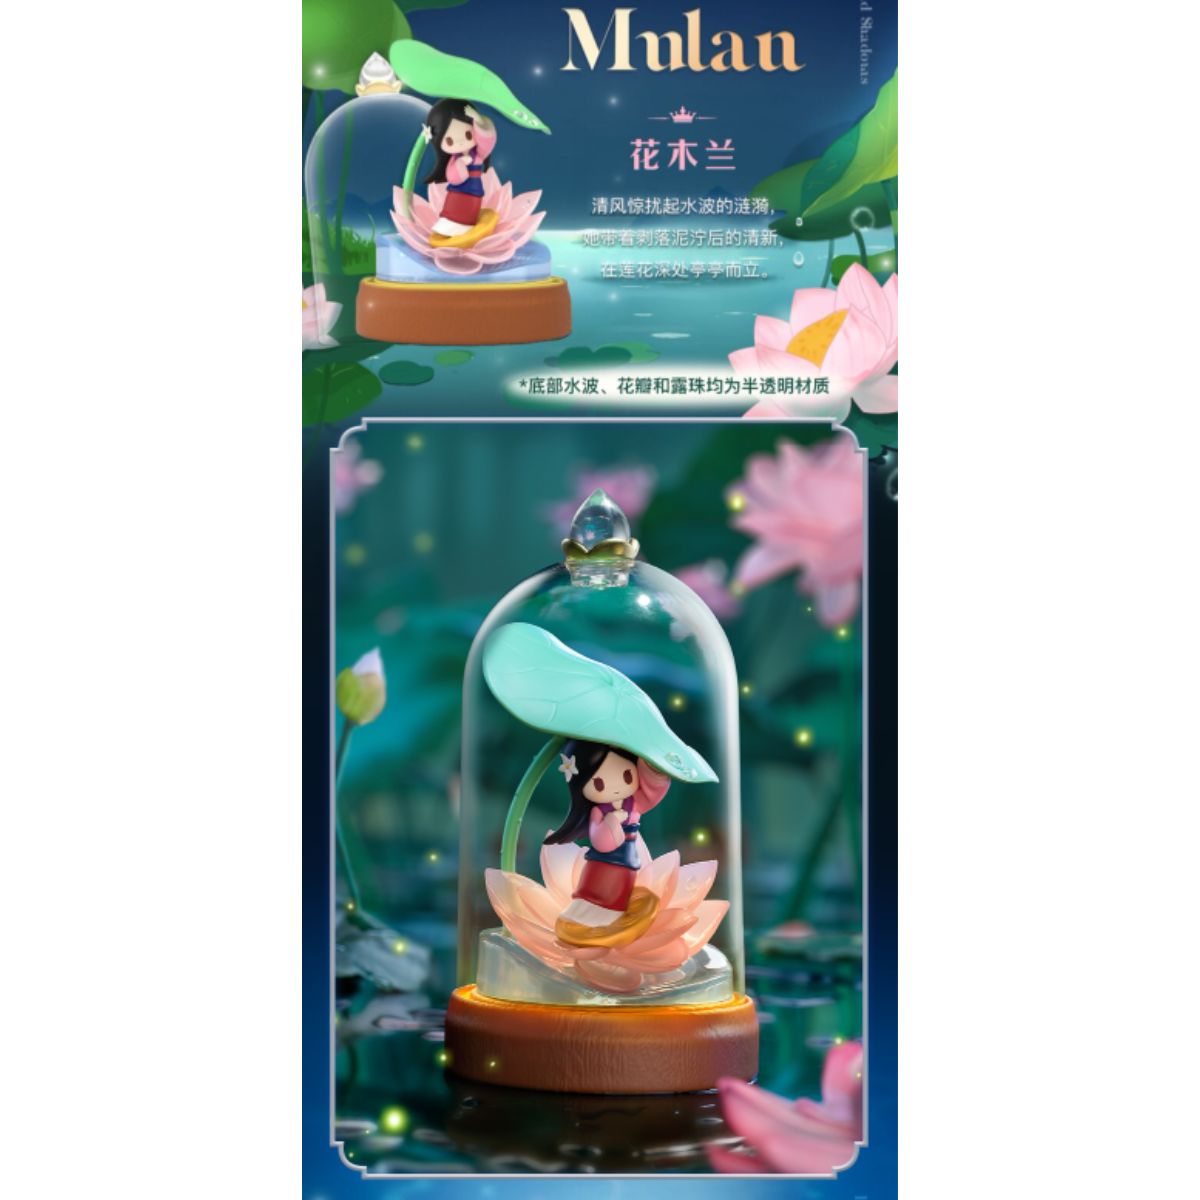 52Toys Disney Princess Flower And Shadow Series-Single Box (Random)-52Toys-Ace Cards &amp; Collectibles